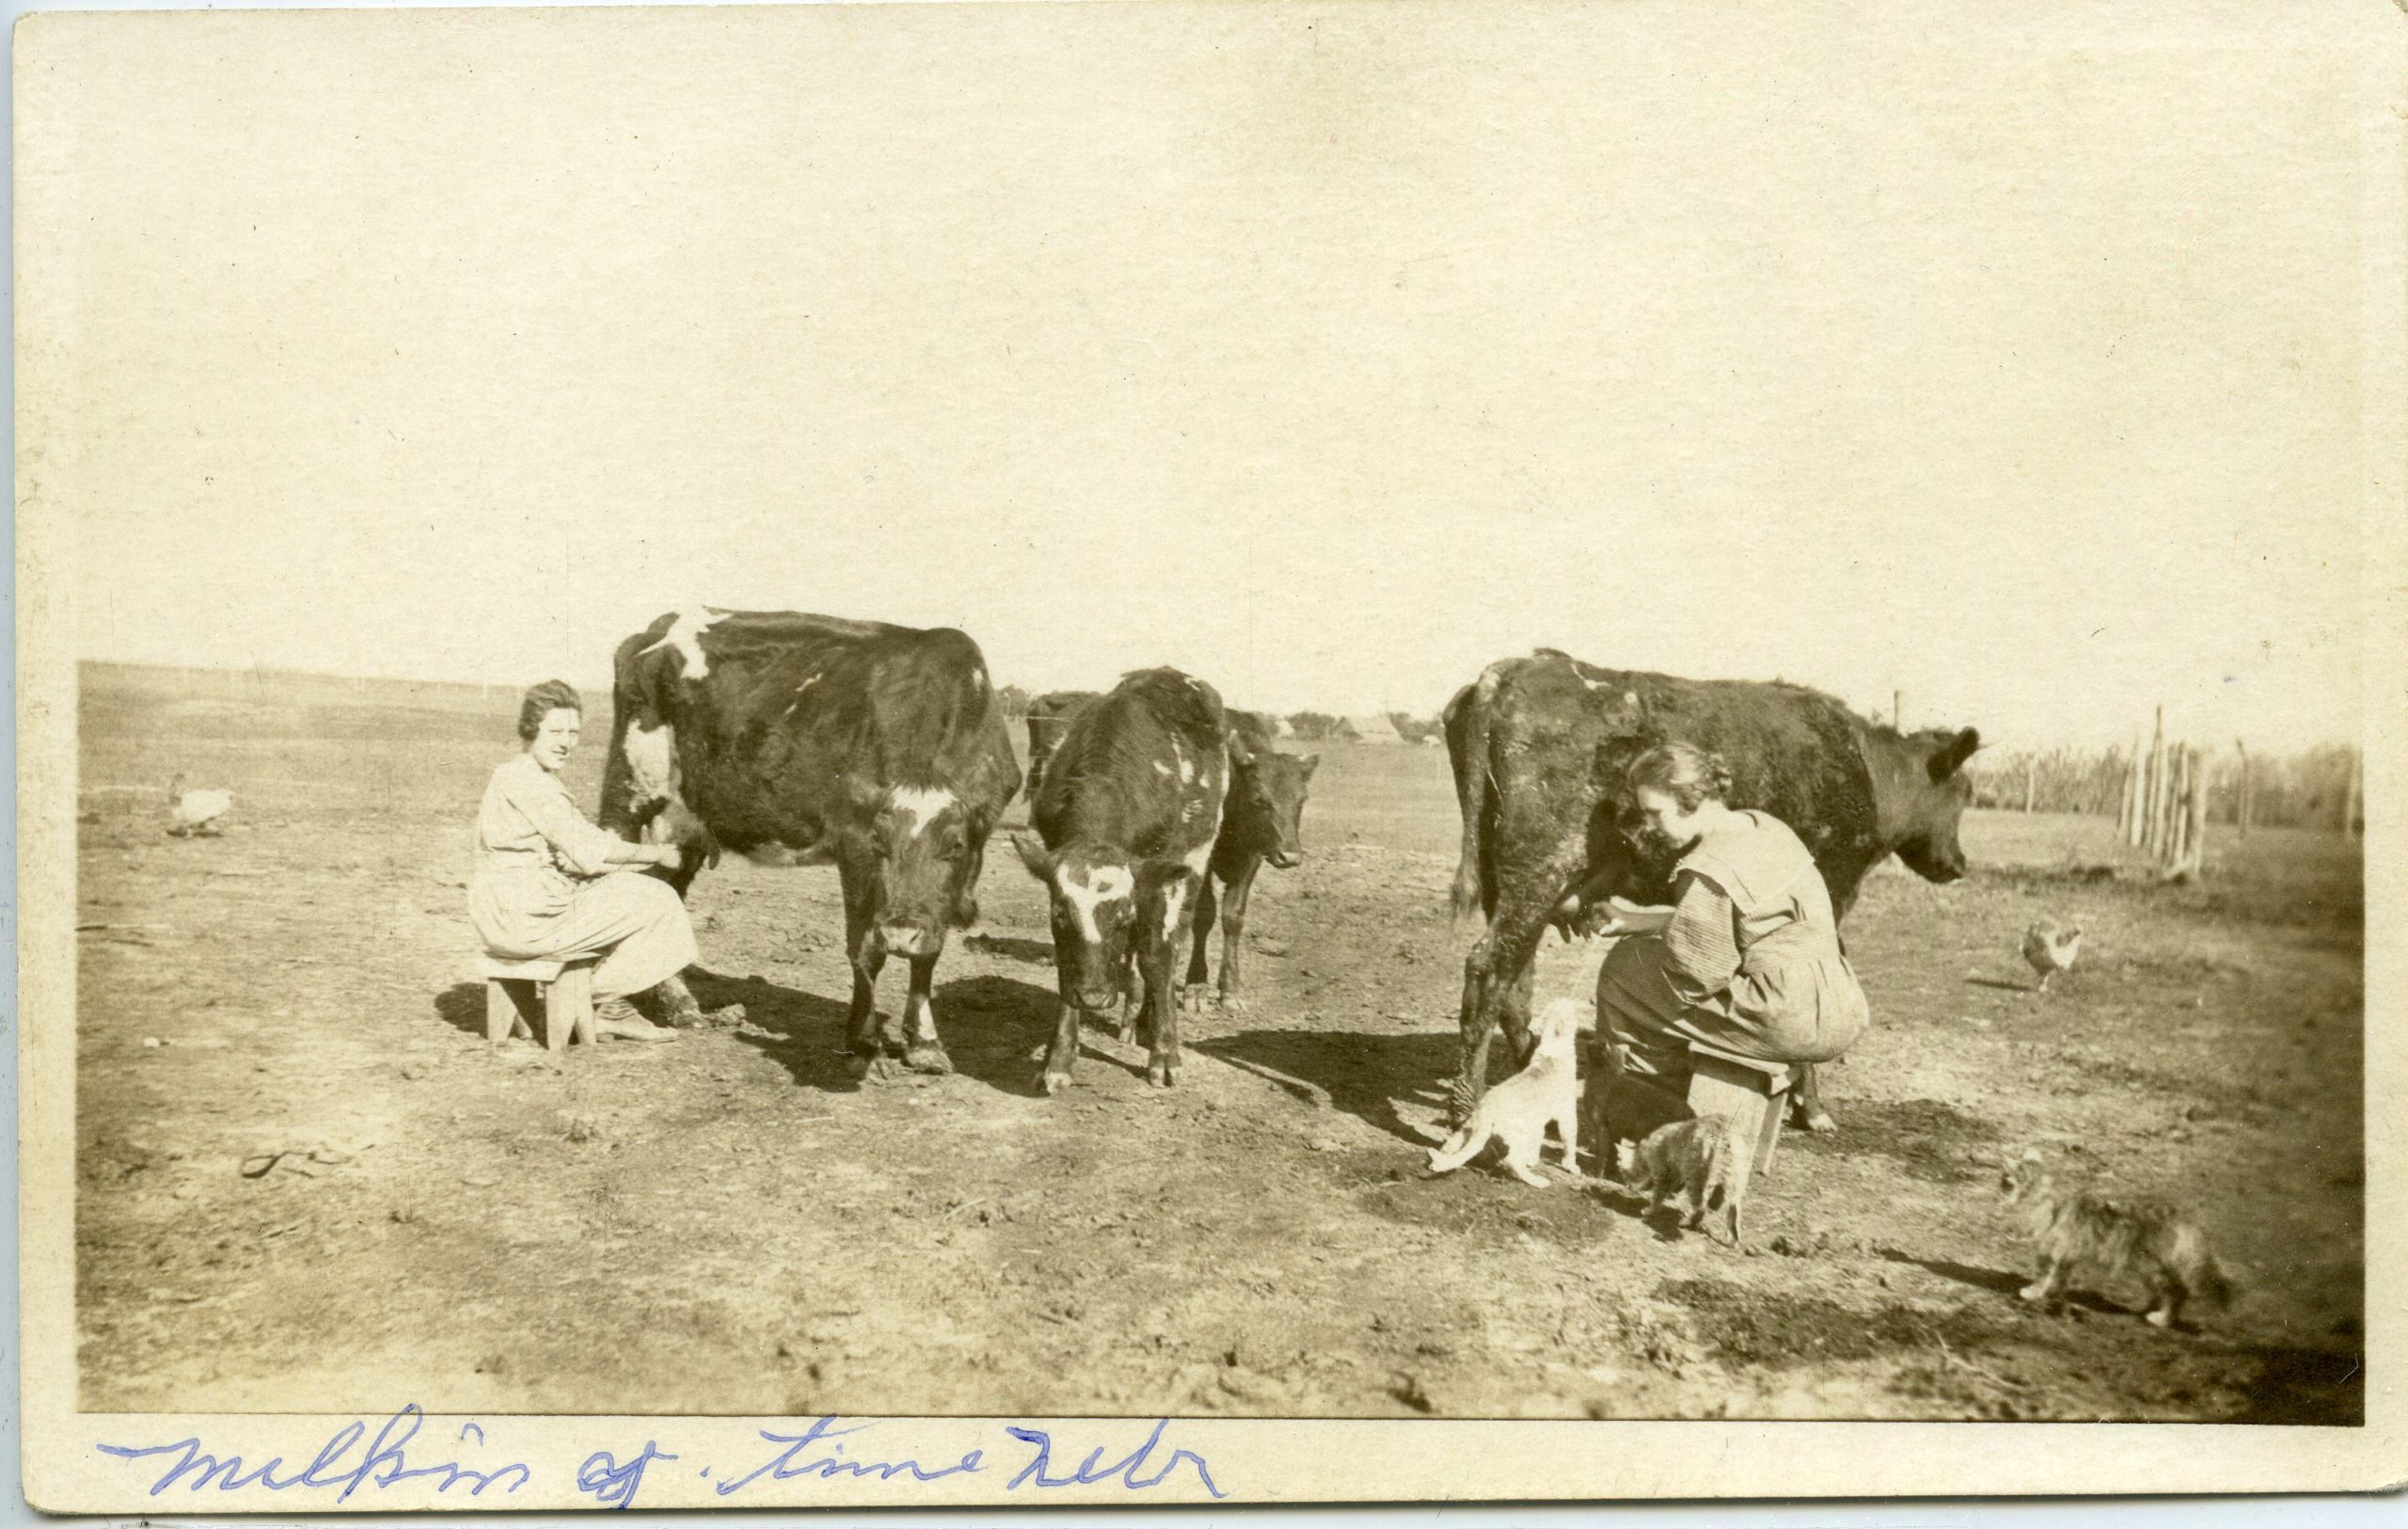 Women Milking Cows. Courtesy of Adams County Historical Society.